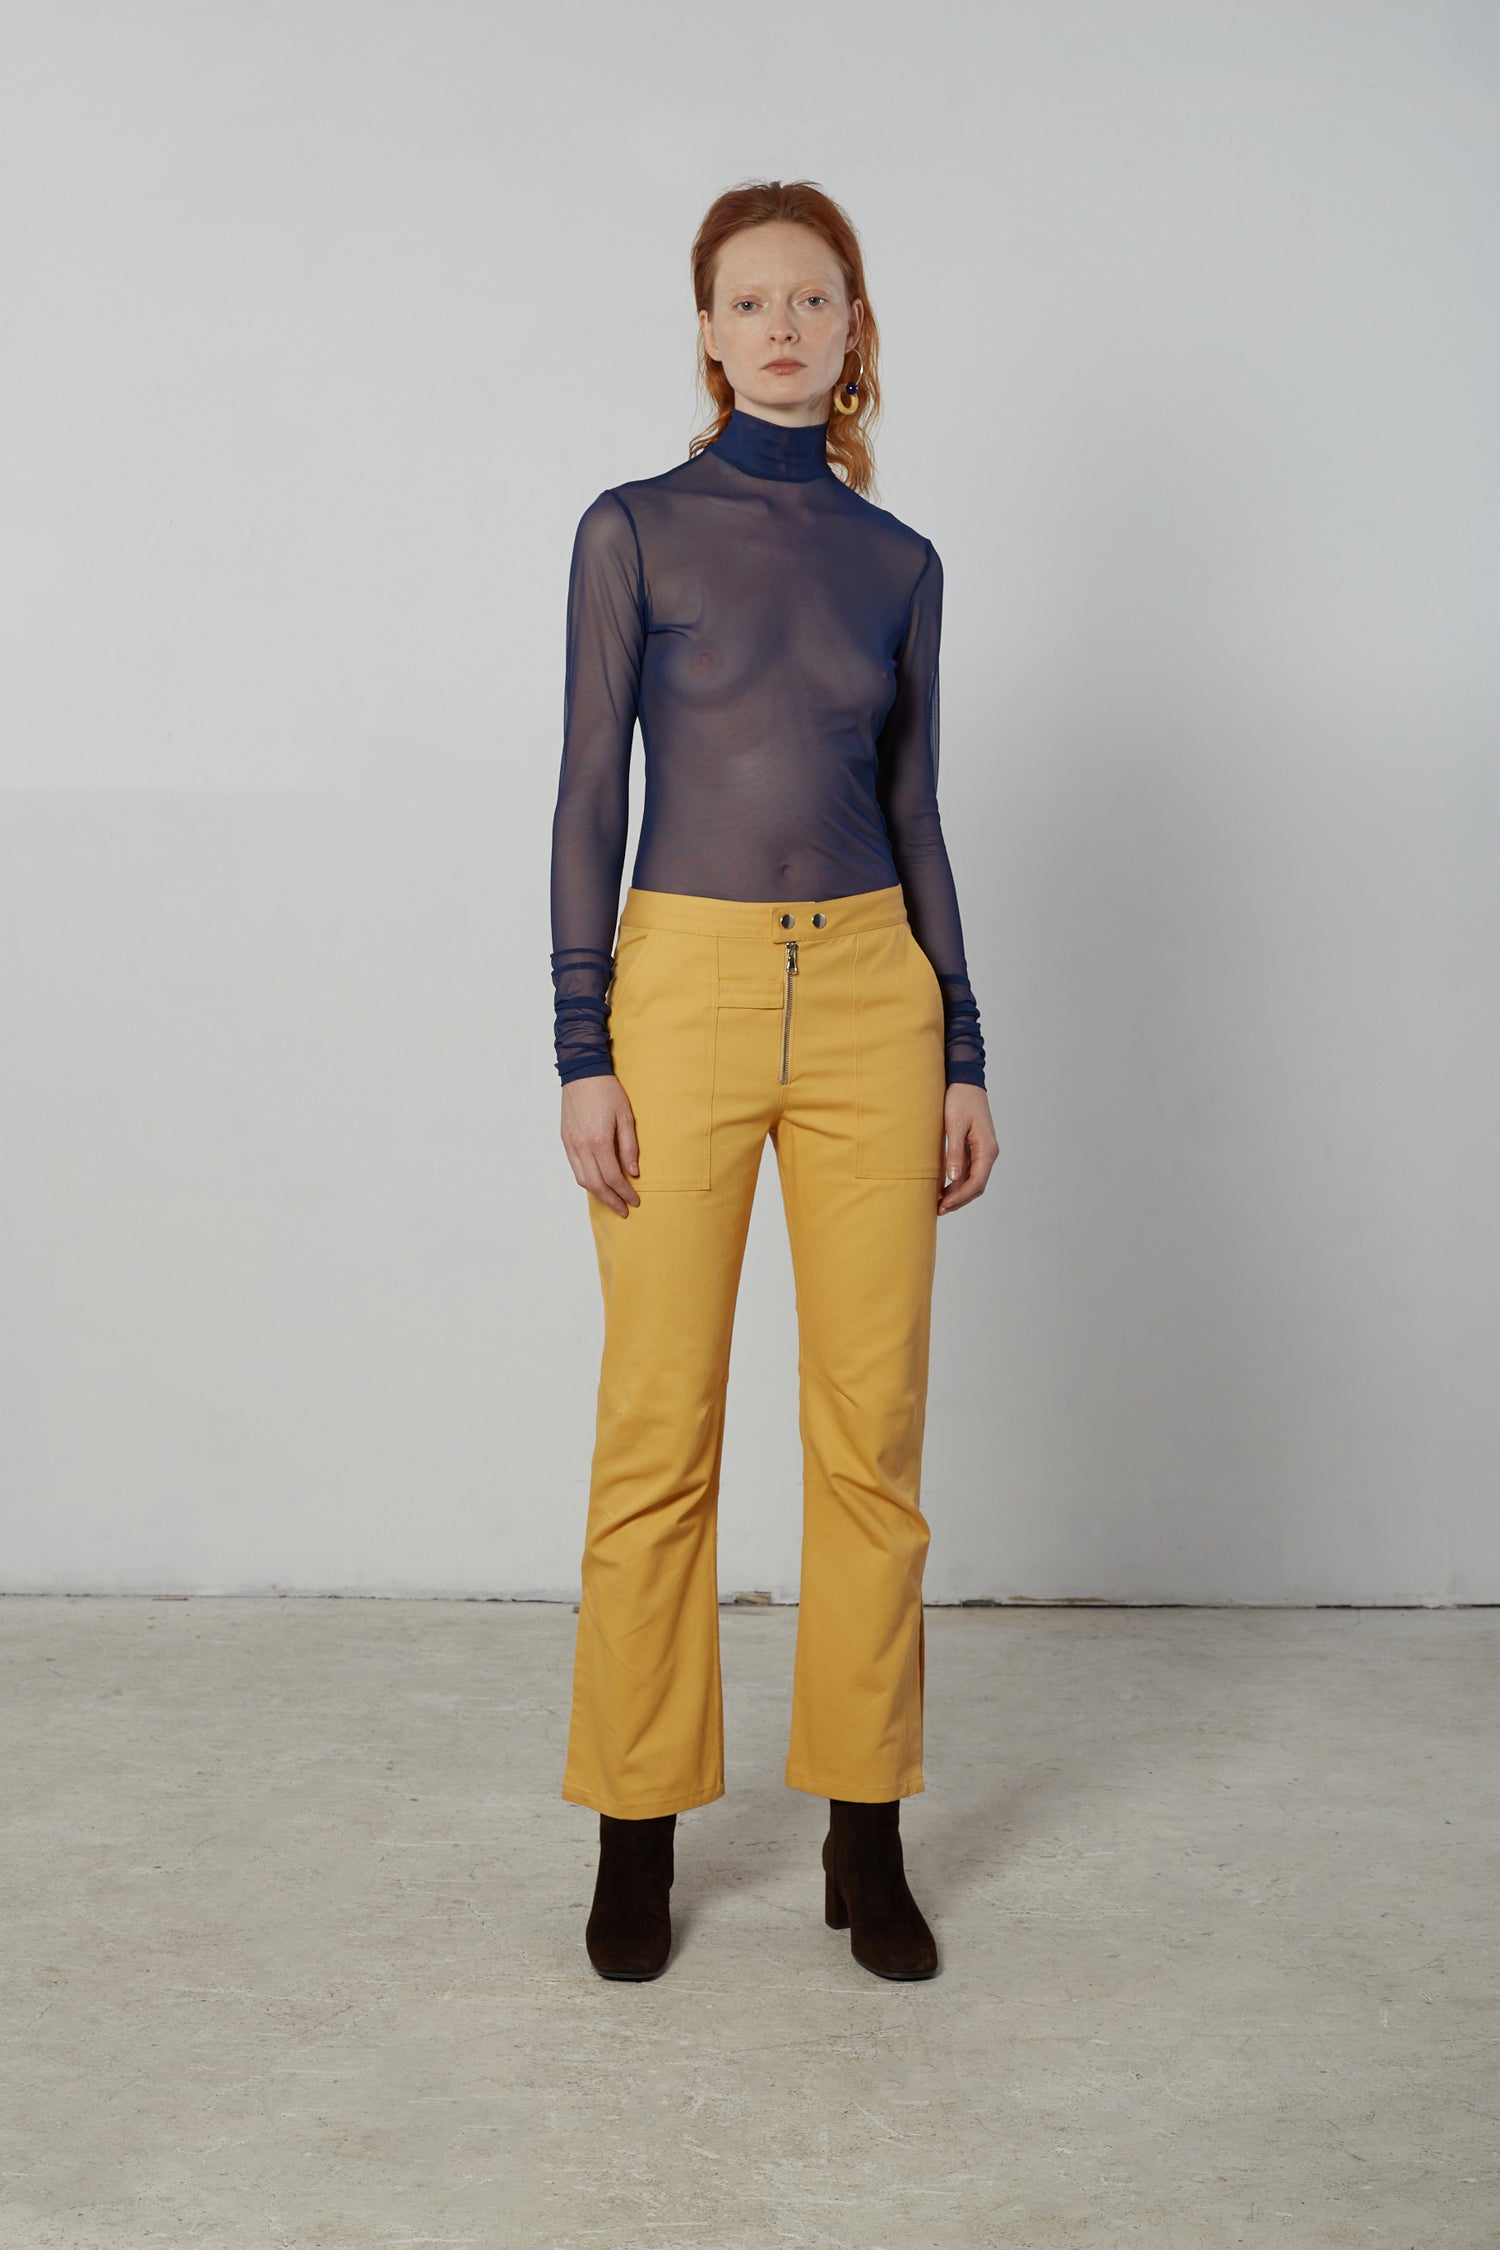 Mesh Turtle Neck – Shop the Space